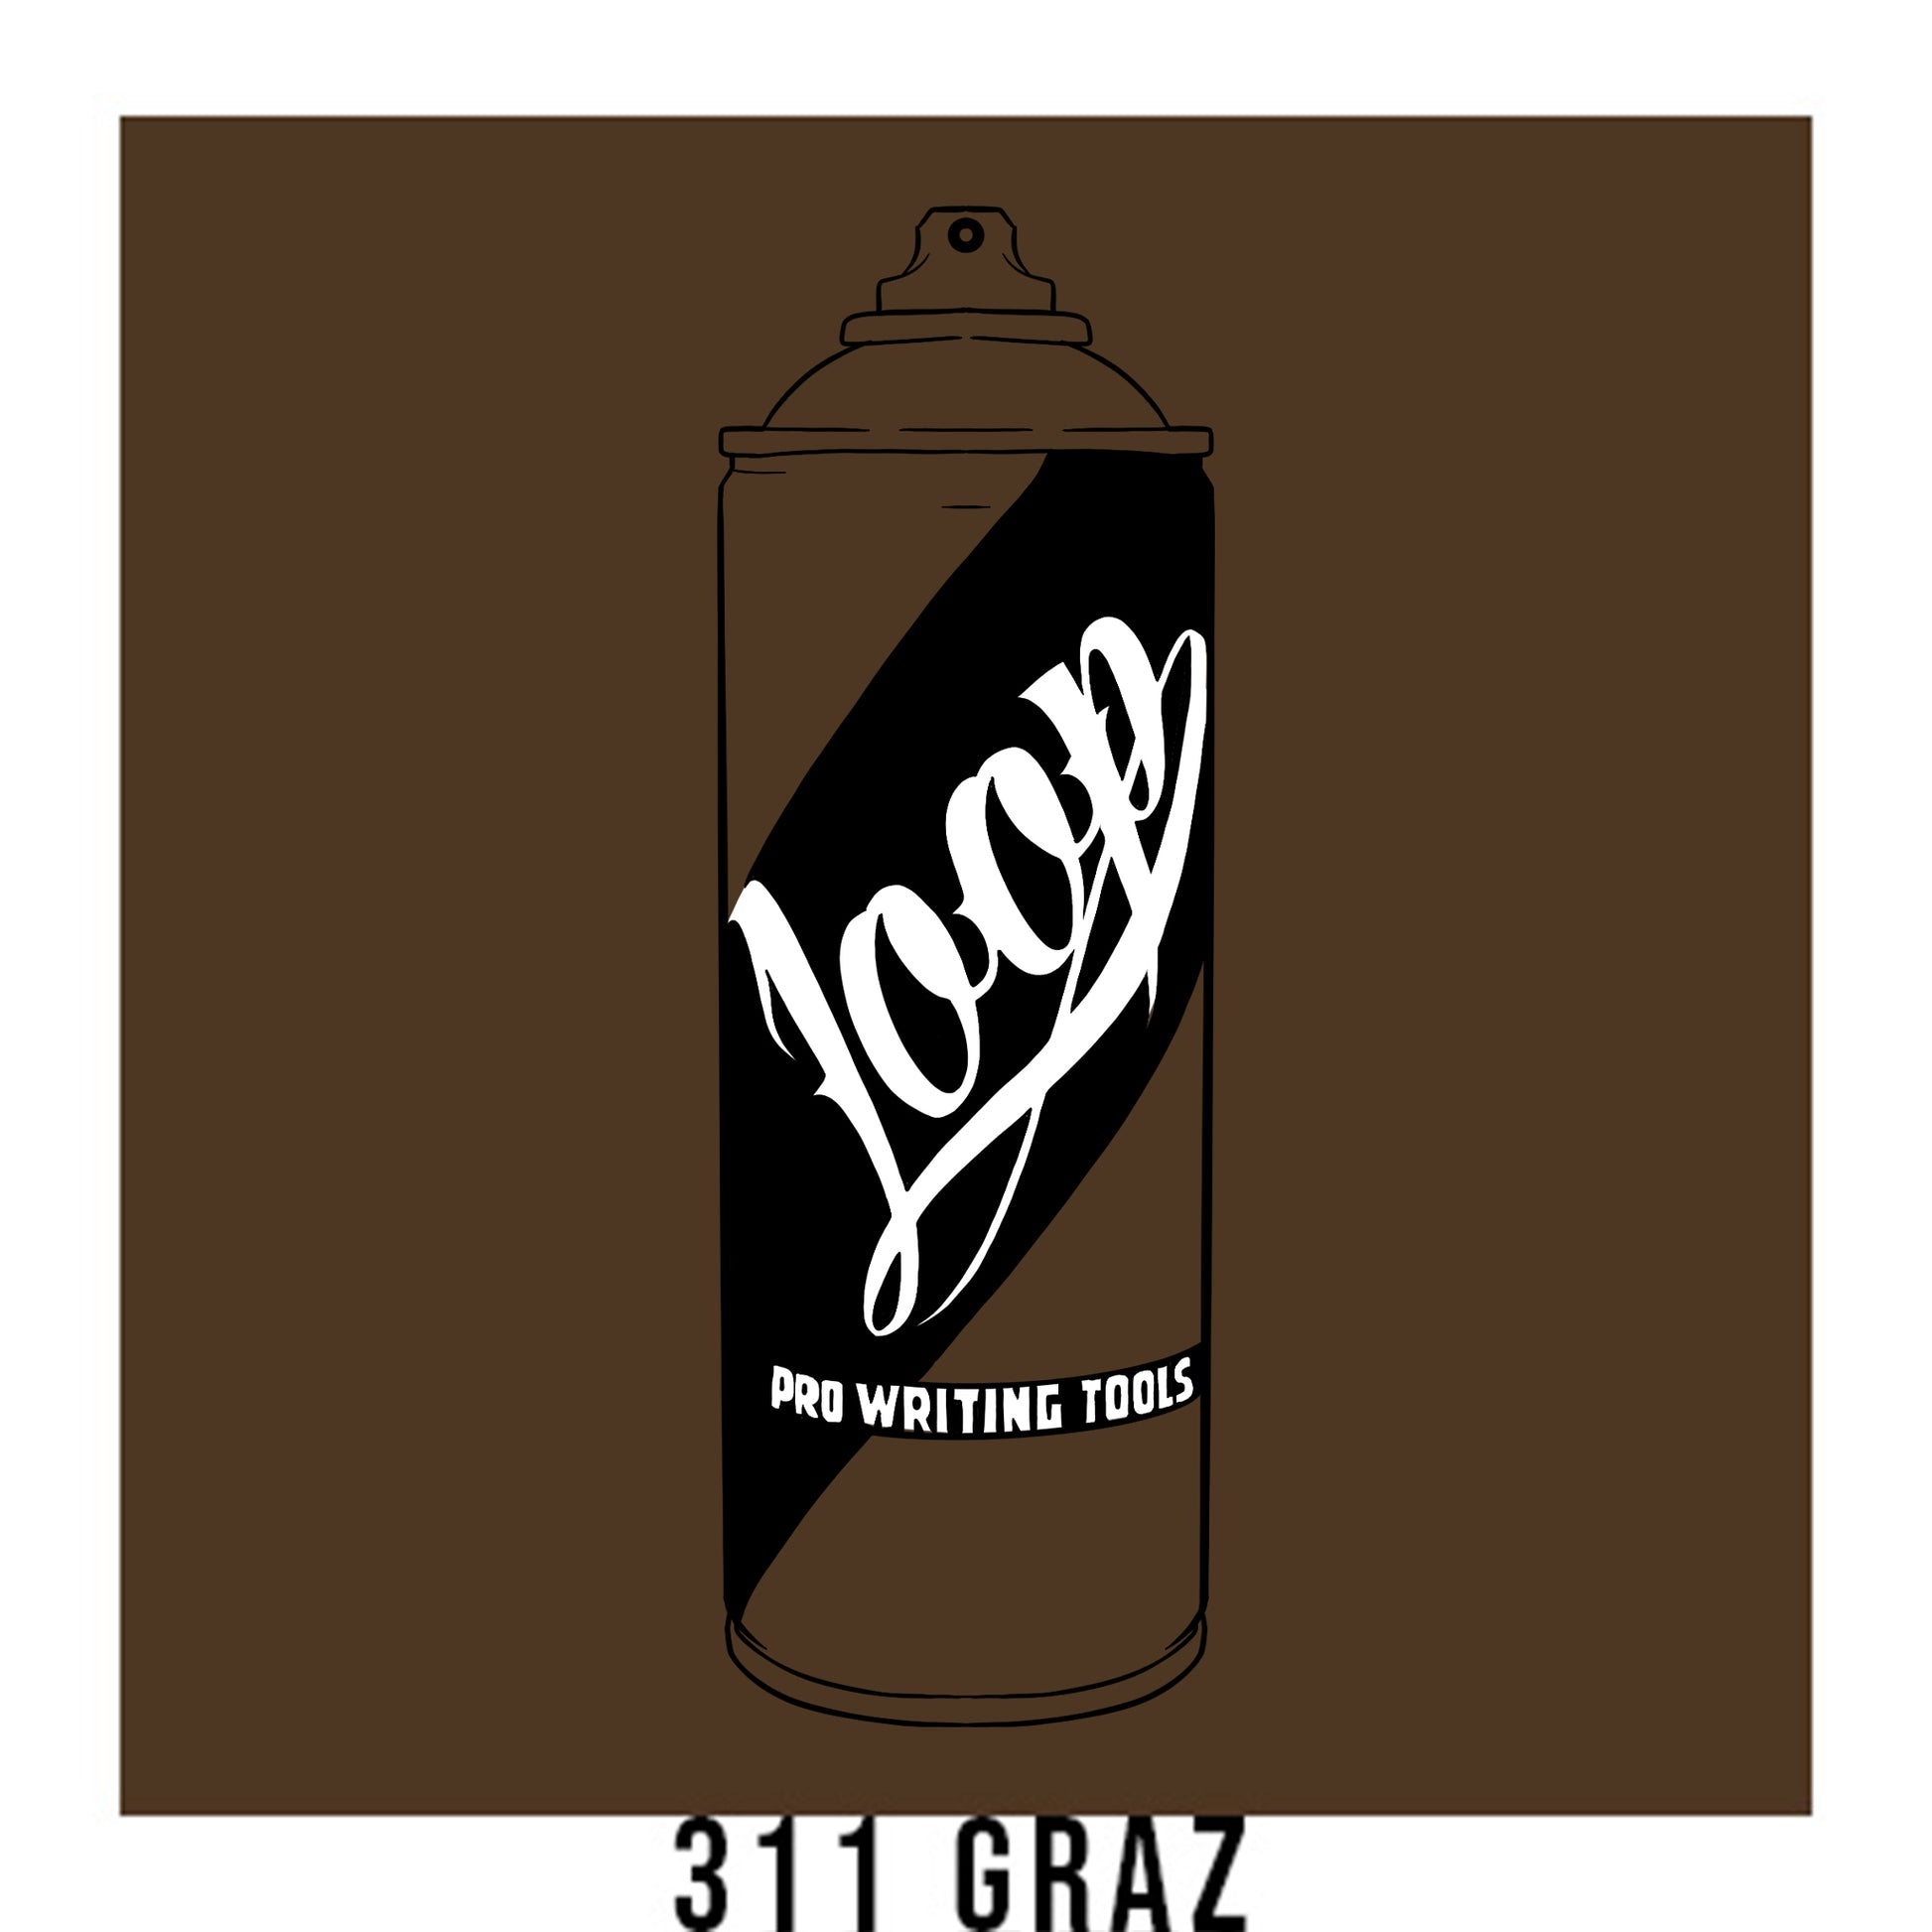 A black outline drawing of a mocha brown spray paint can with the word "Loop" written on the face in script. The background is a color swatch of the same mocha brown with a white border with the words "311 Graz" at the bottom.